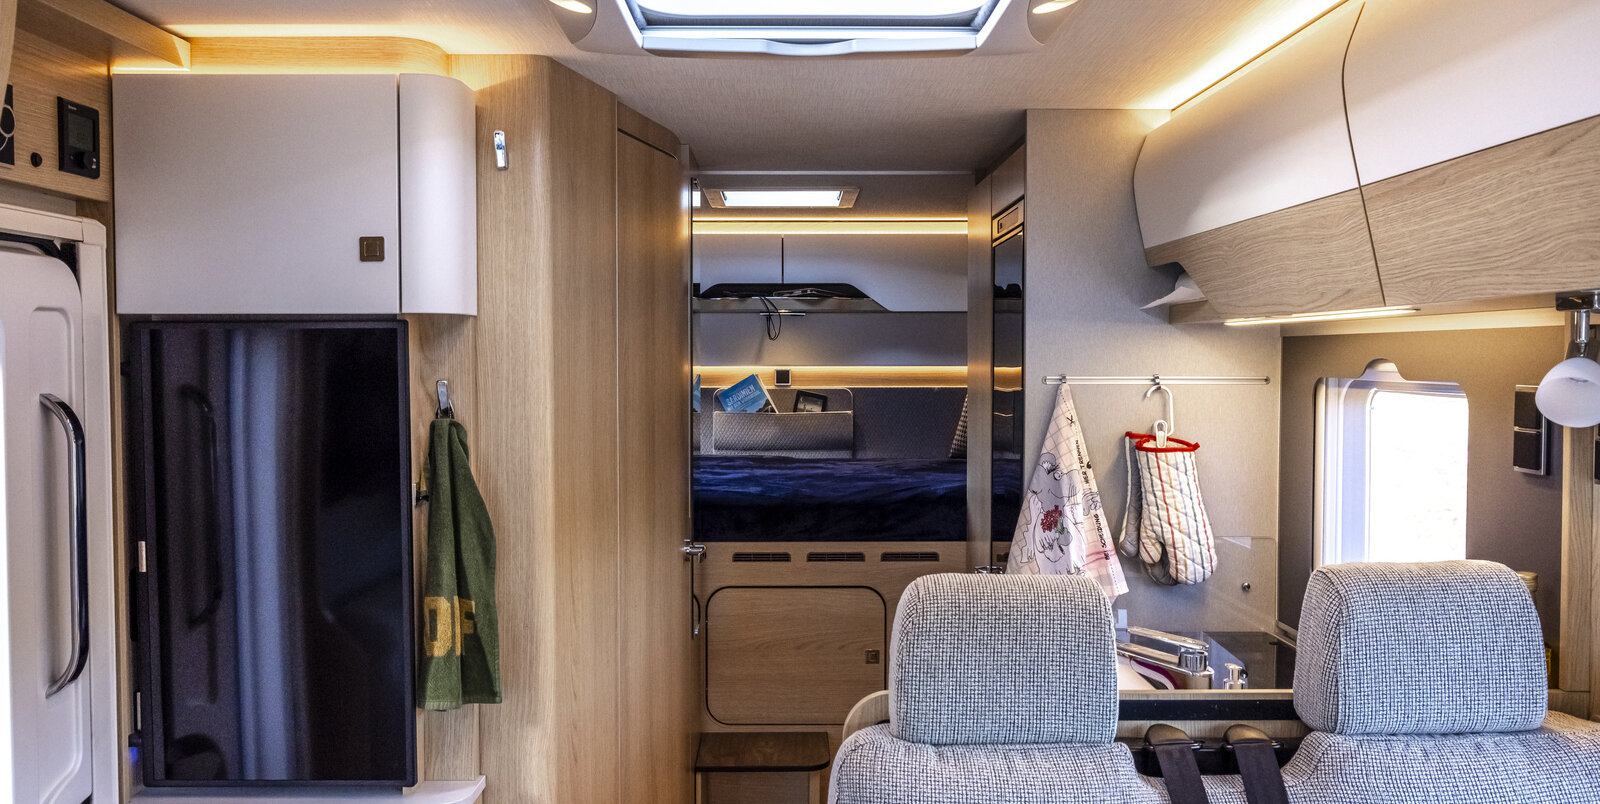 Living area in the HYMER B-MC-T WL: backrest seating area with headrests, kitchen block, refrigerator, view of the rear area